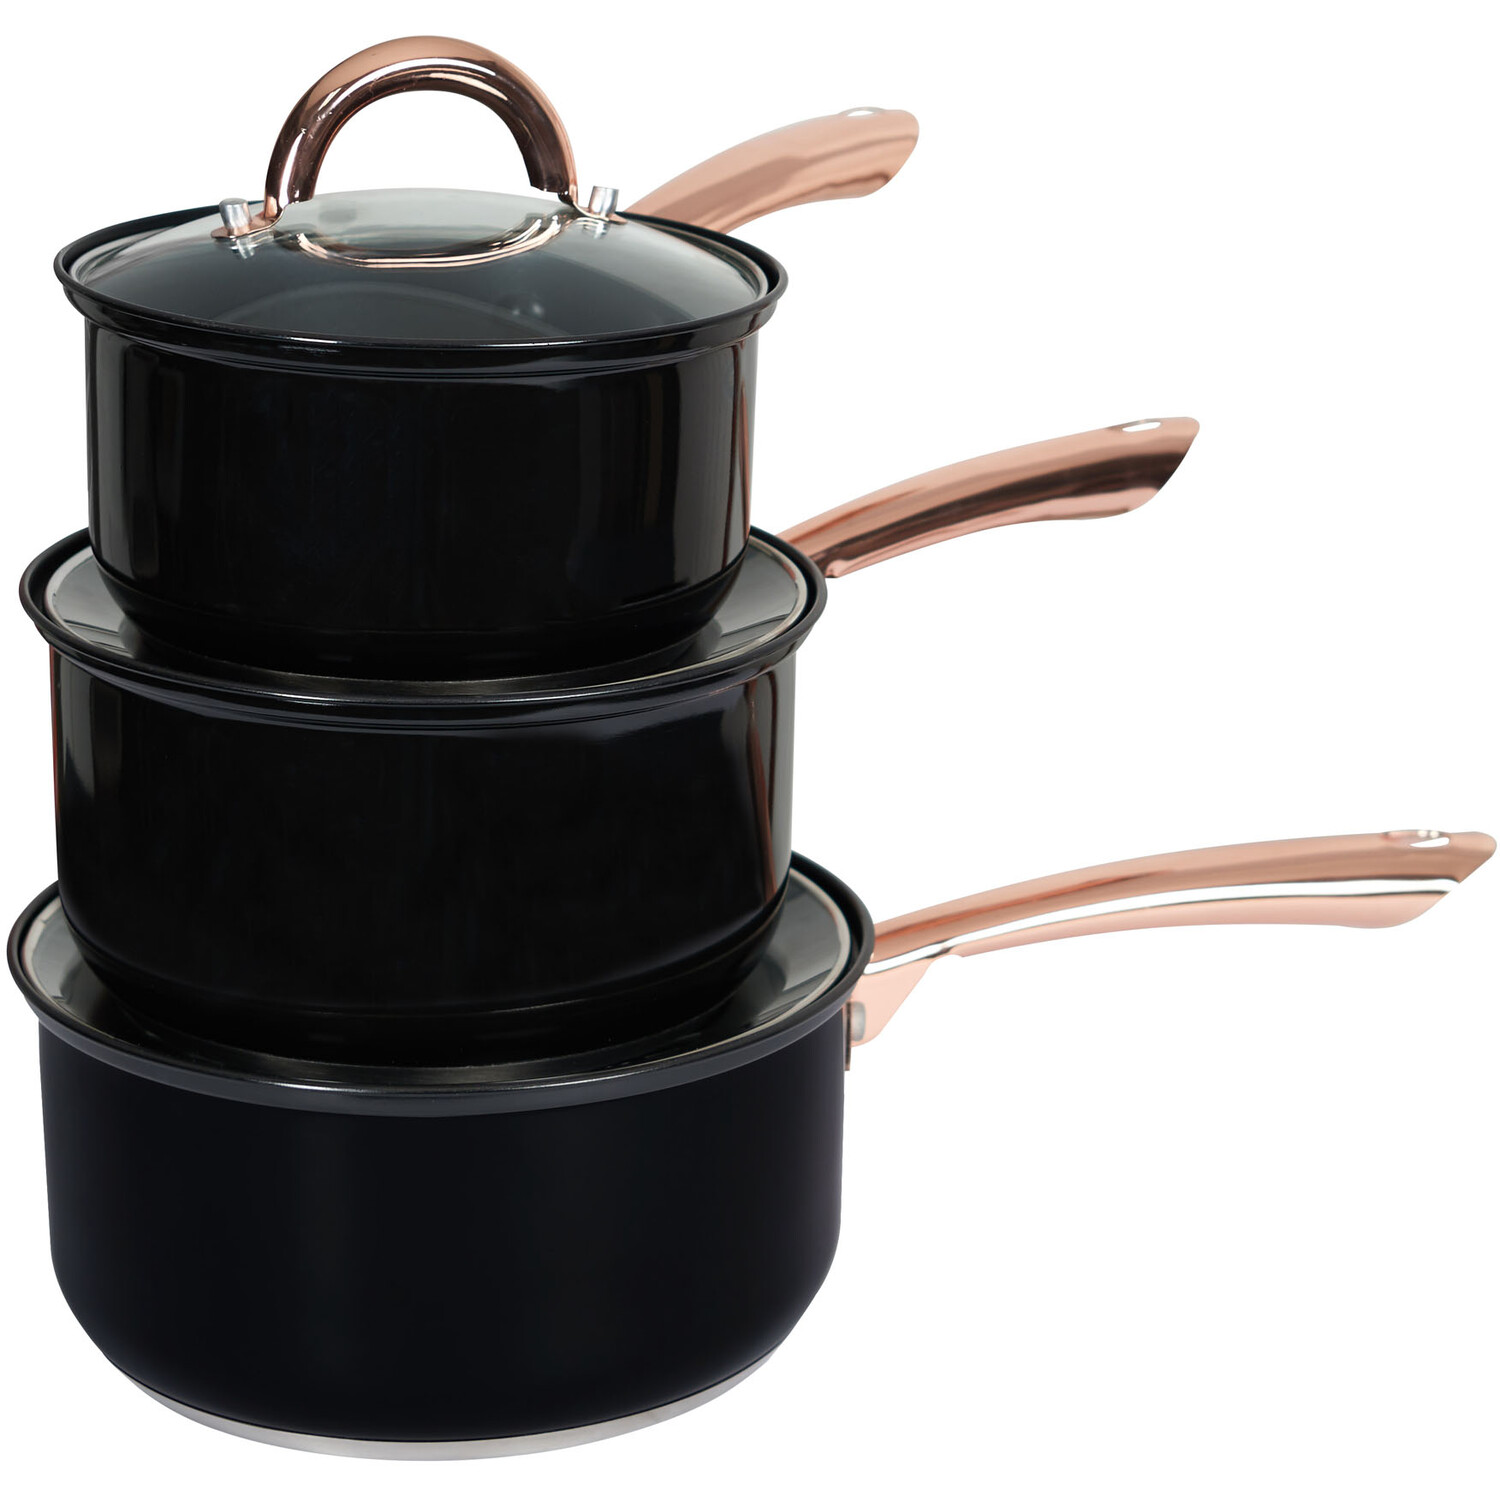 Brooklyn Black and Rose Gold Stainless Steel Non-Stick Saucepan Set of 3 Image 1